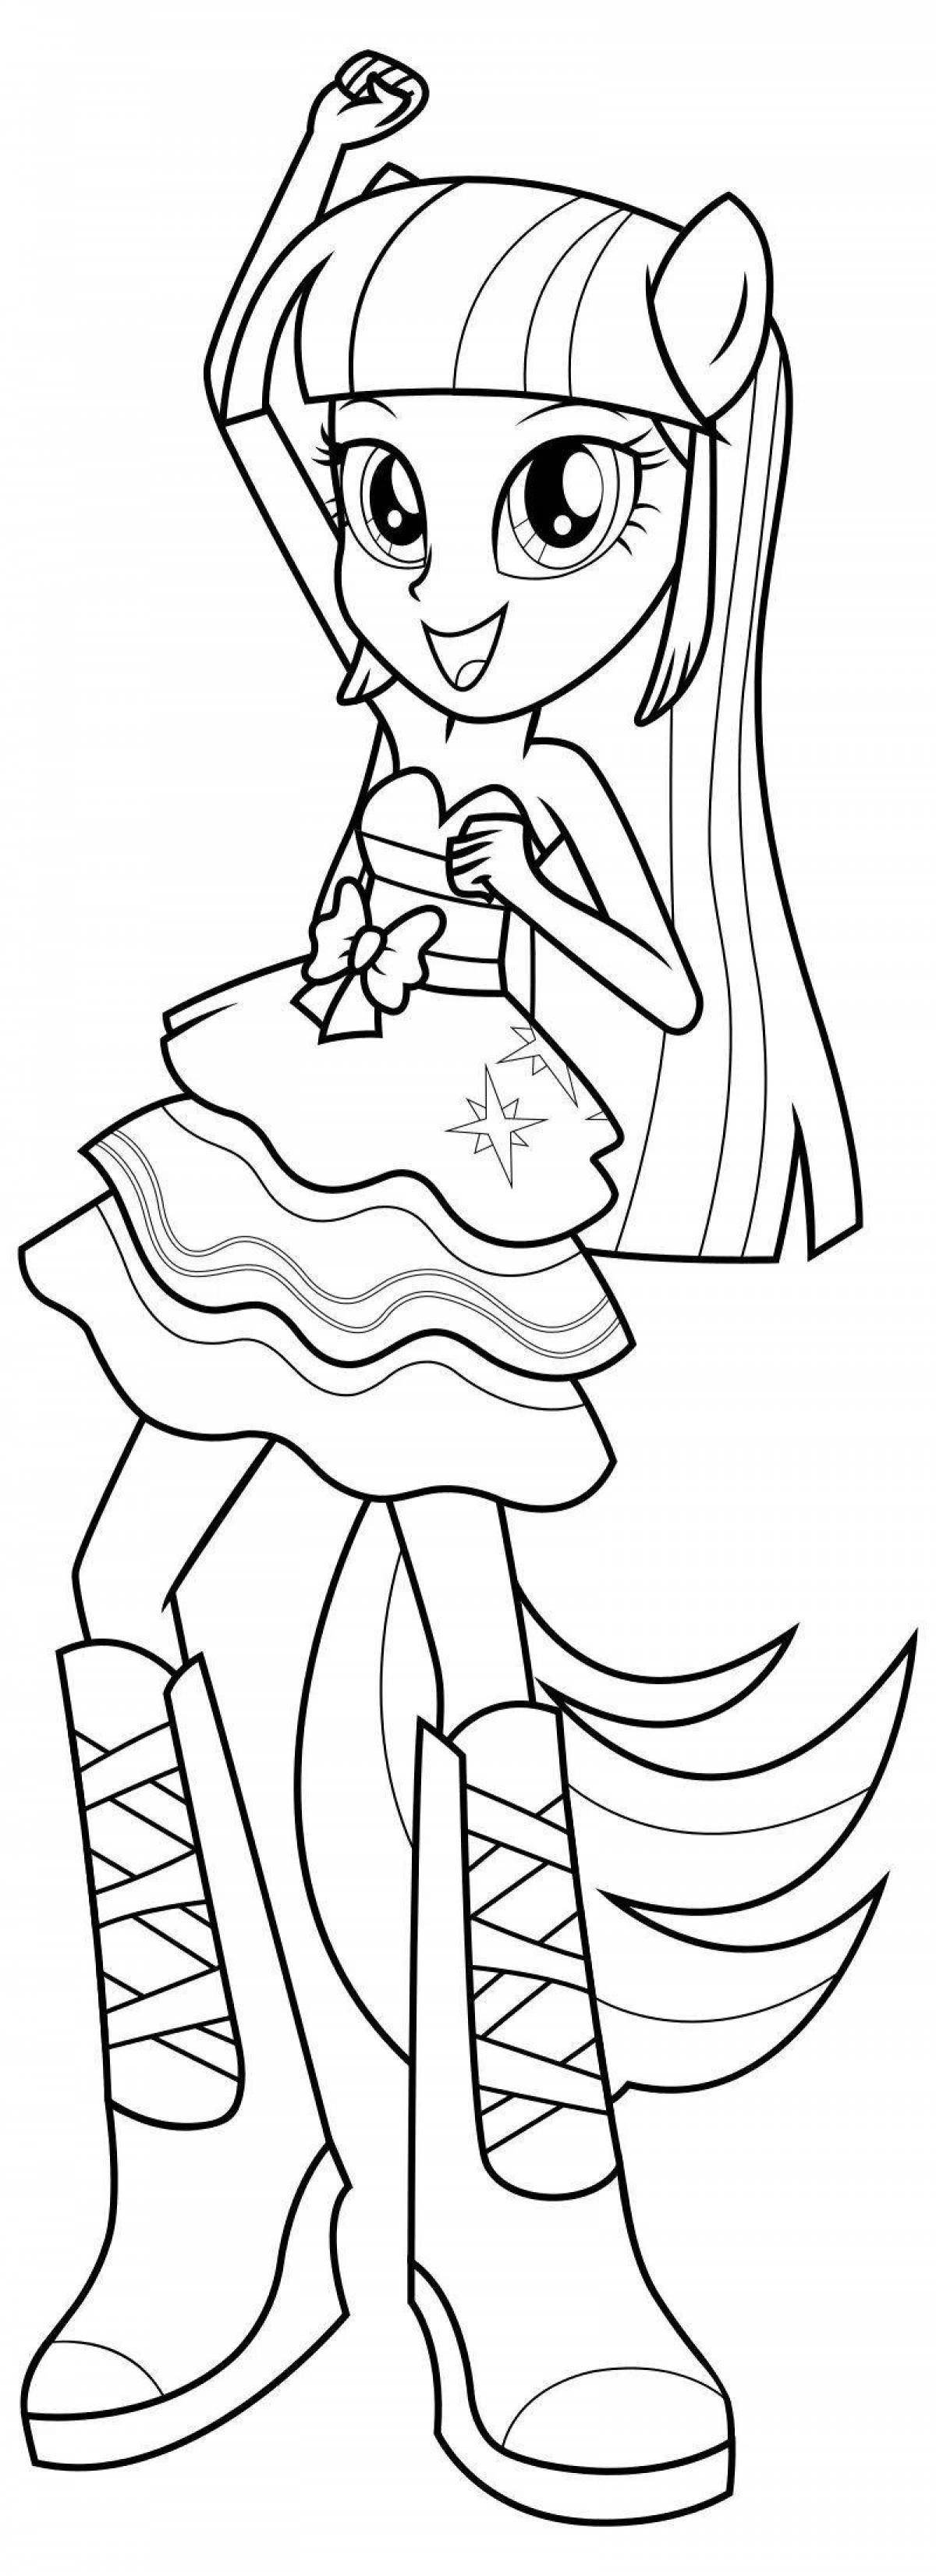 Cheerful Equestria Girl Sparkle coloring book